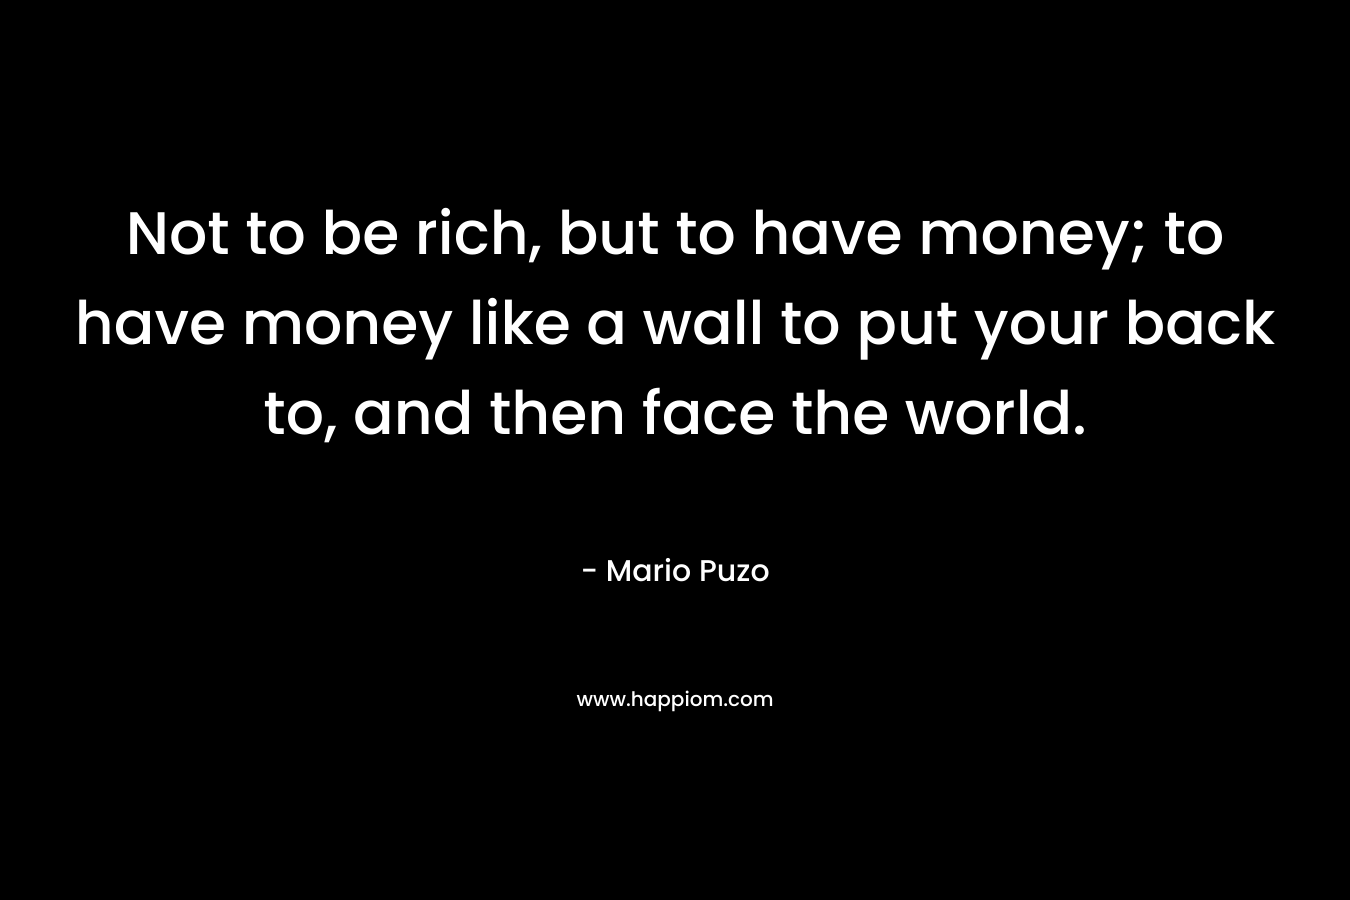 Not to be rich, but to have money; to have money like a wall to put your back to, and then face the world.